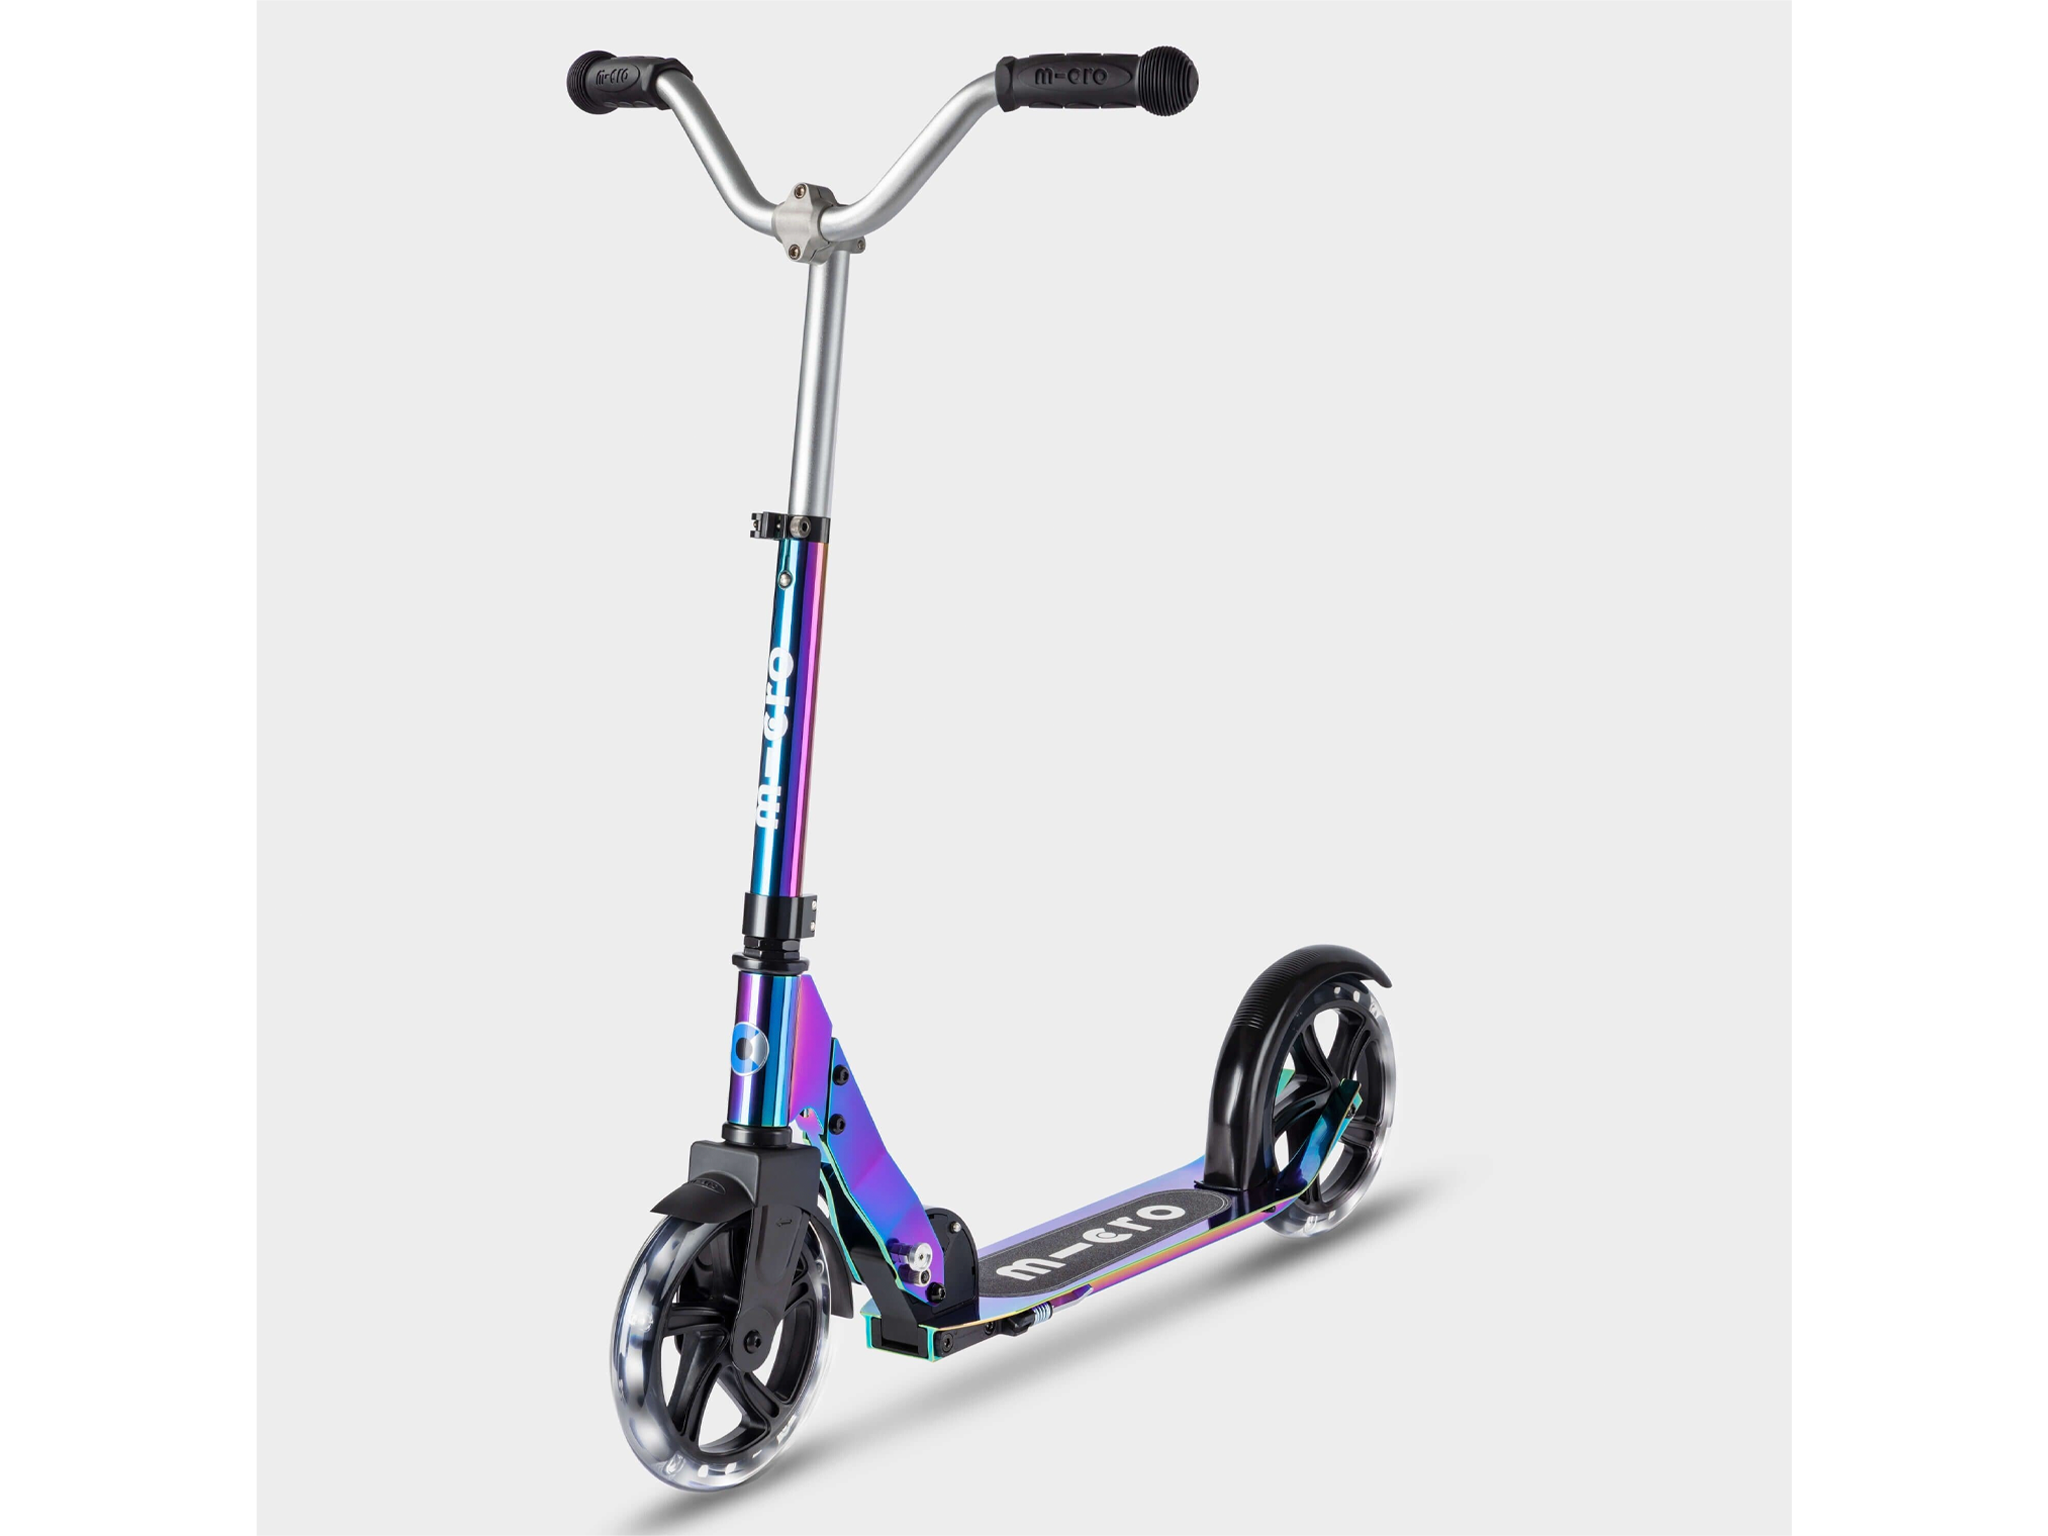 Micro-scooter-best-gifts-for-8-year-olds-review-indybest